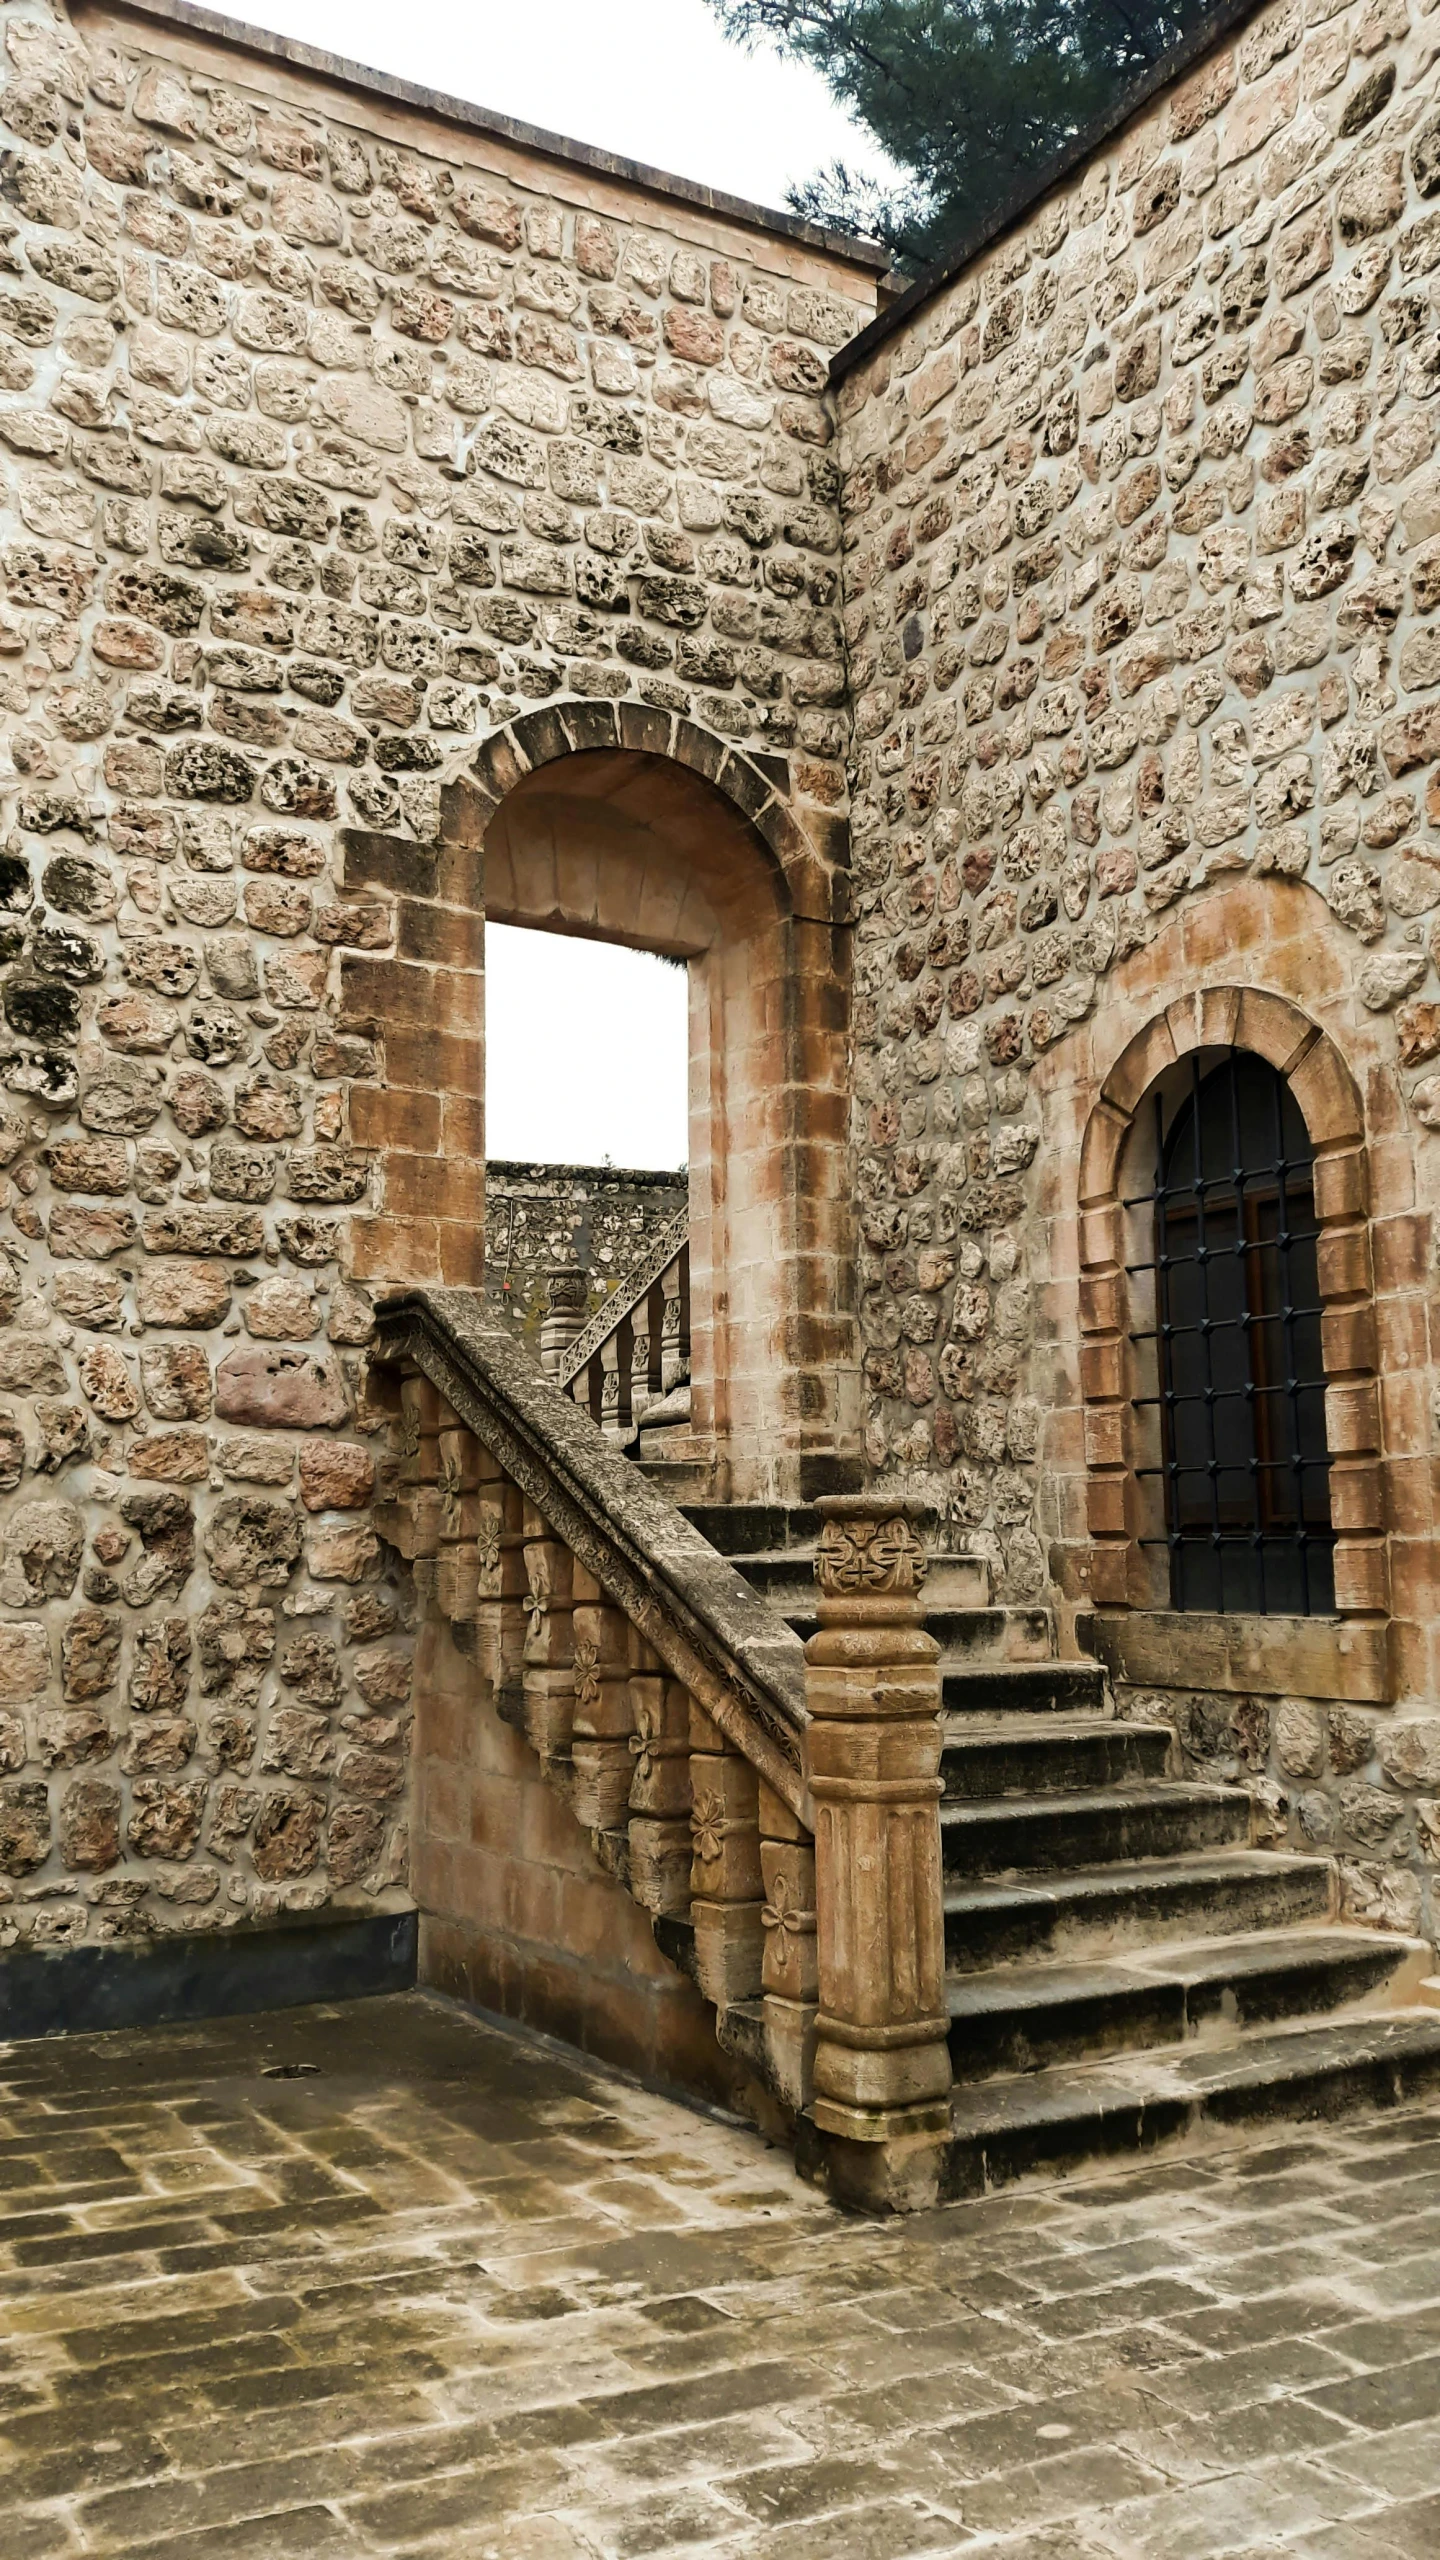 a stone building with steps and arched windows